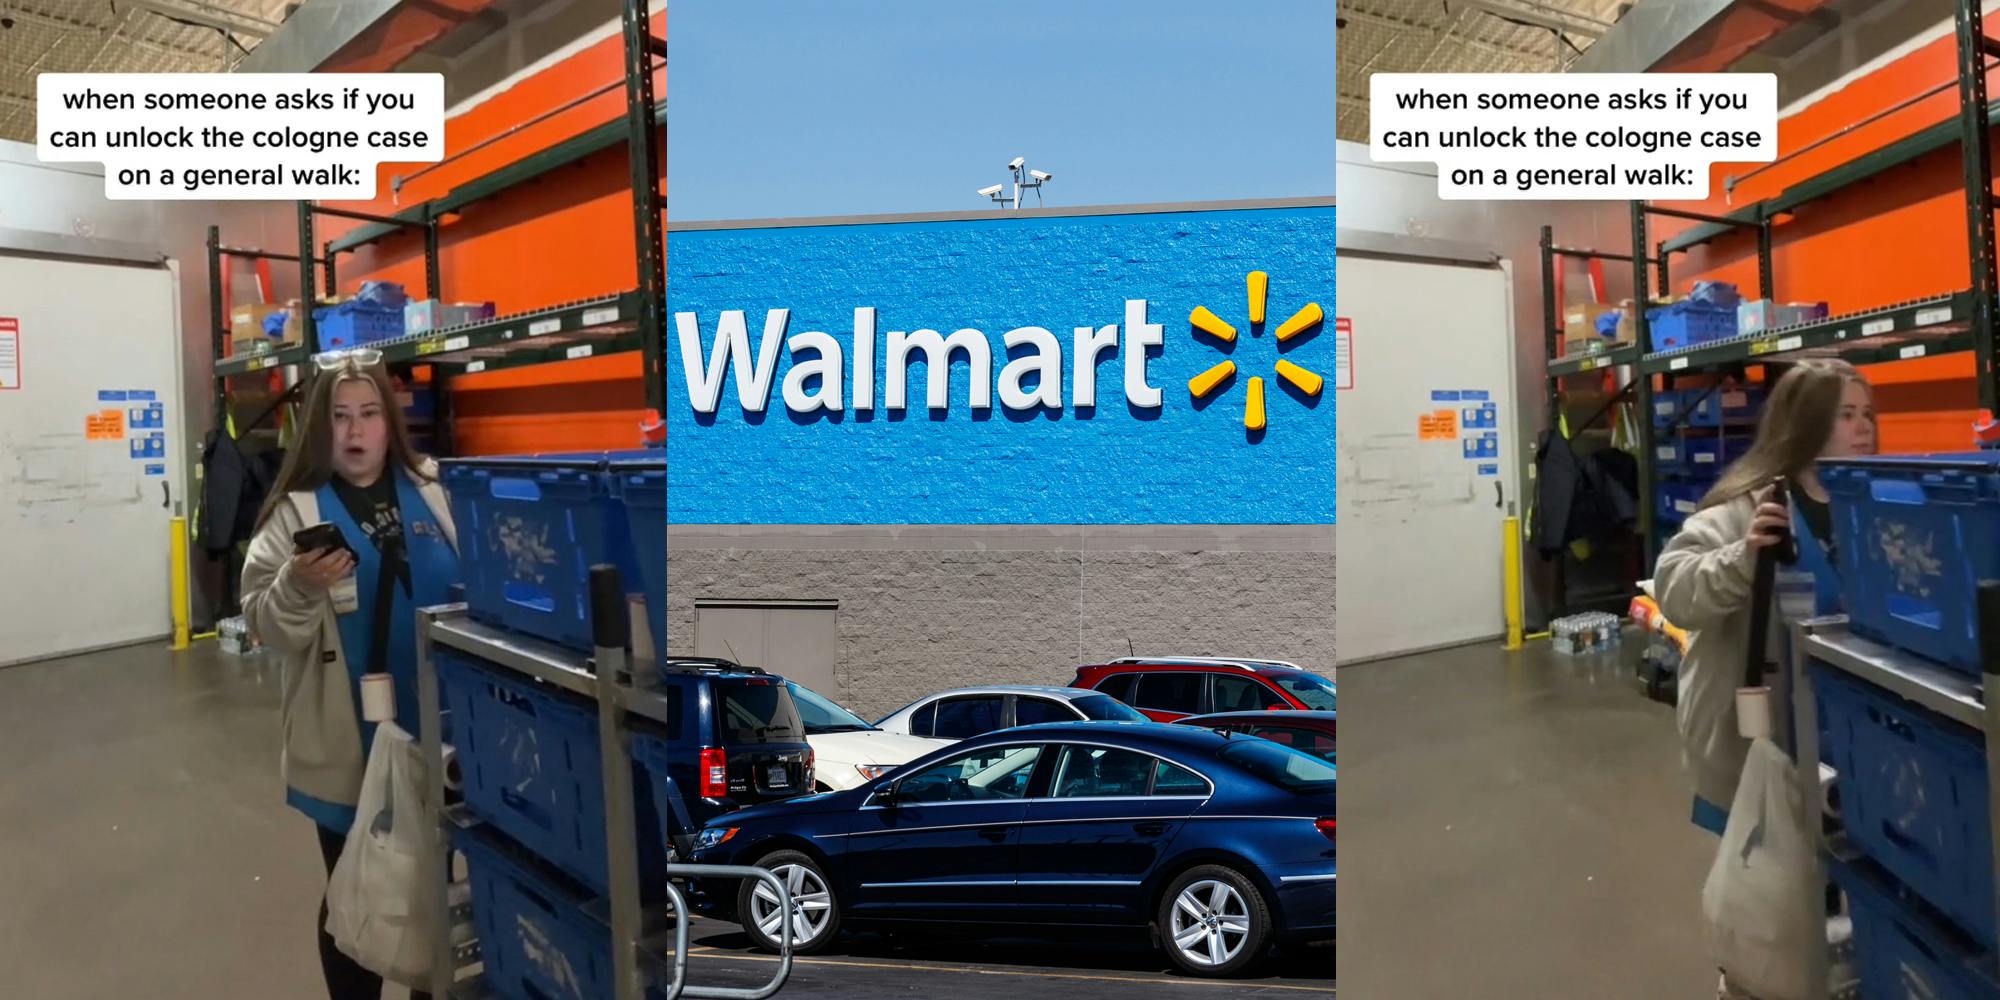 Walmart employee with caption "when someone asks if you can unlock the cologne case on a general walk" (l) Walmart building with sign and parking lot (c) Walmart employee with caption "when someone asks if you can unlock the cologne case on a general walk" (r)